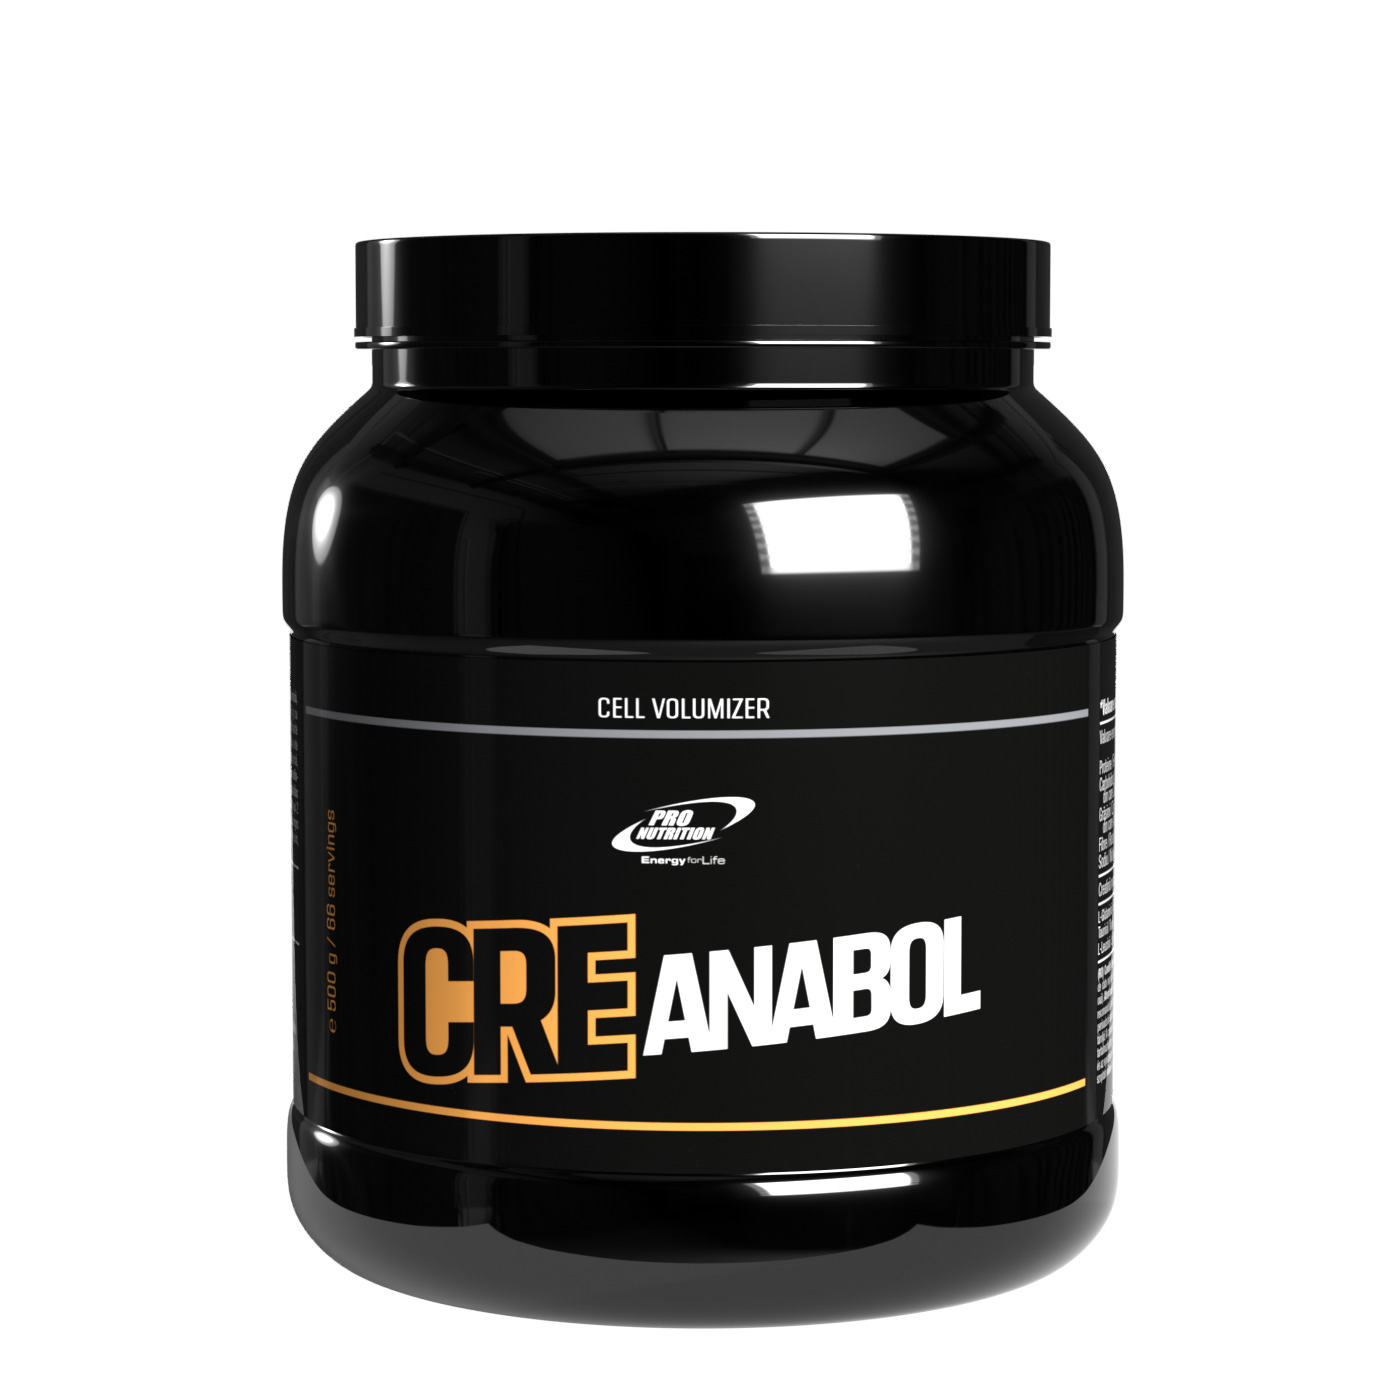 Cre Anabol, 500 g, Pro Nutrition